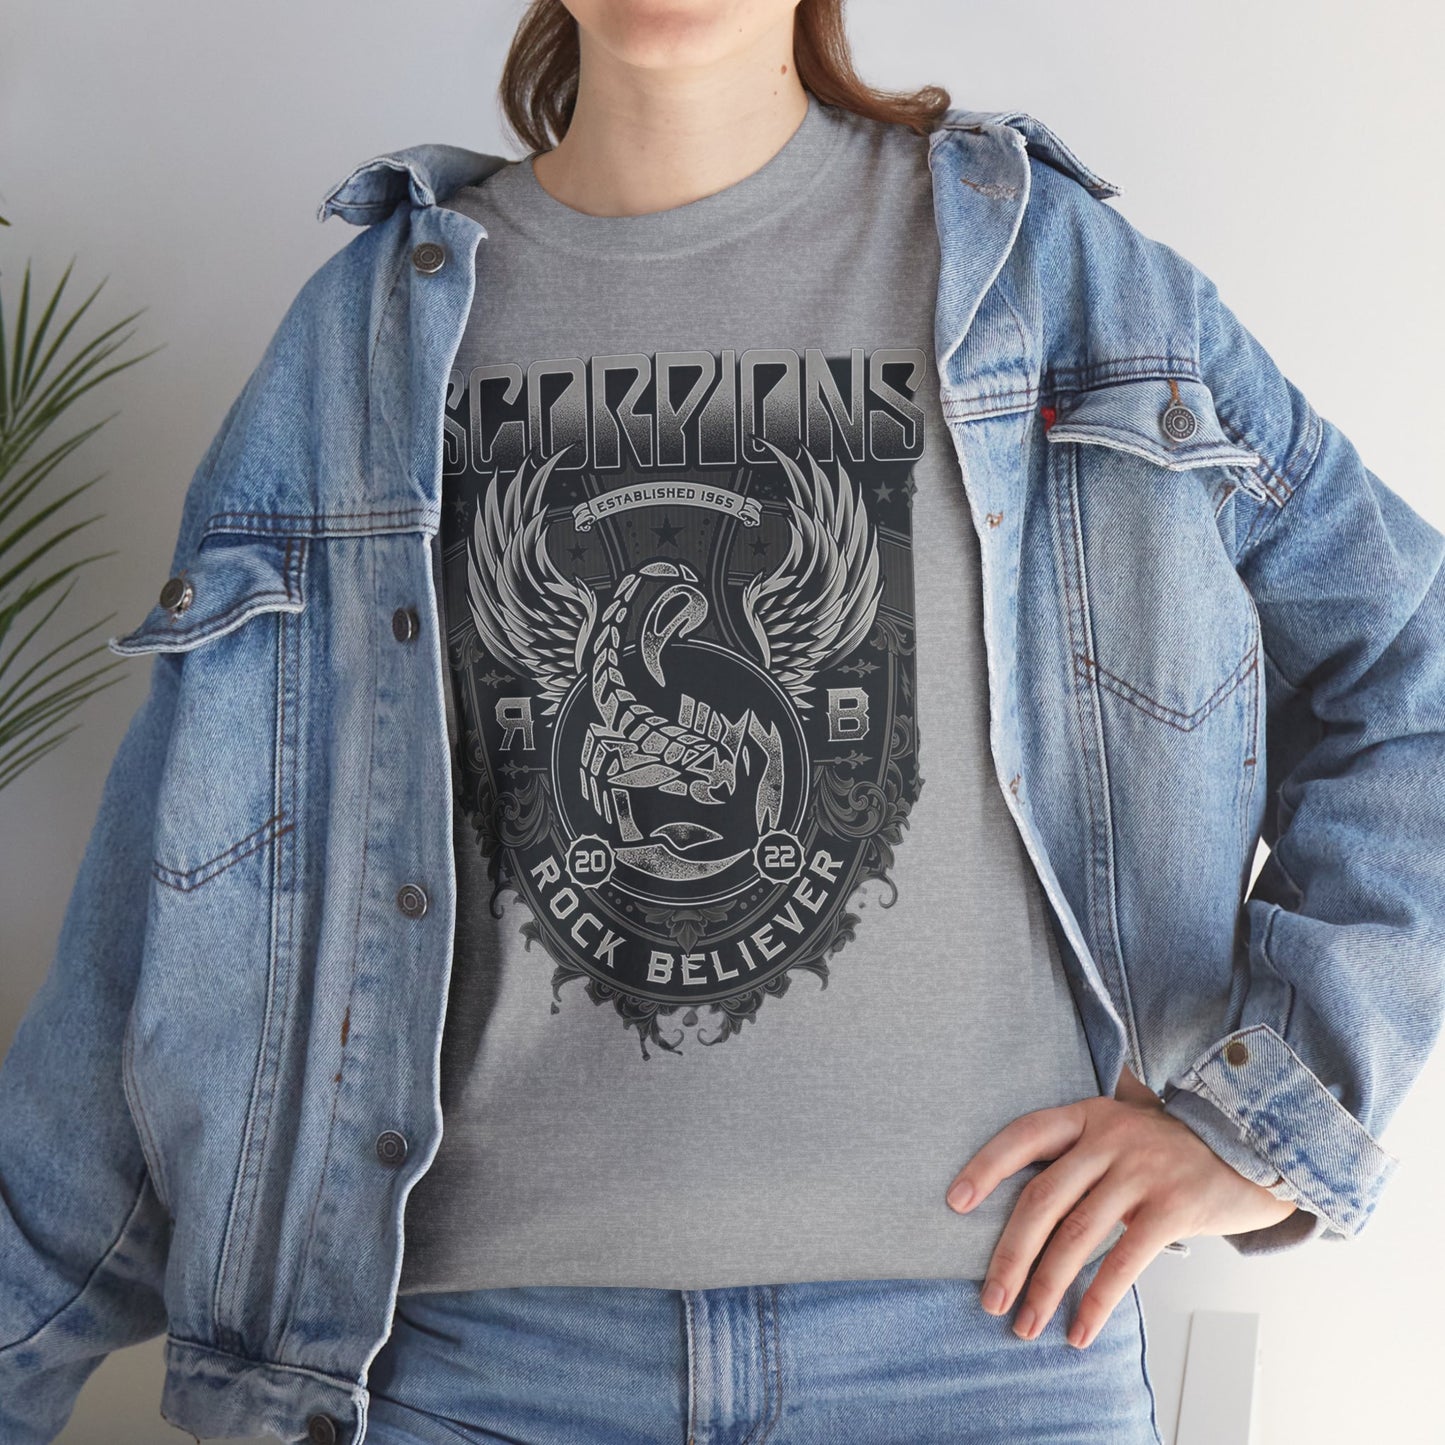 The Scorpions High Quality Printed Unisex Heavy Cotton T-shirt